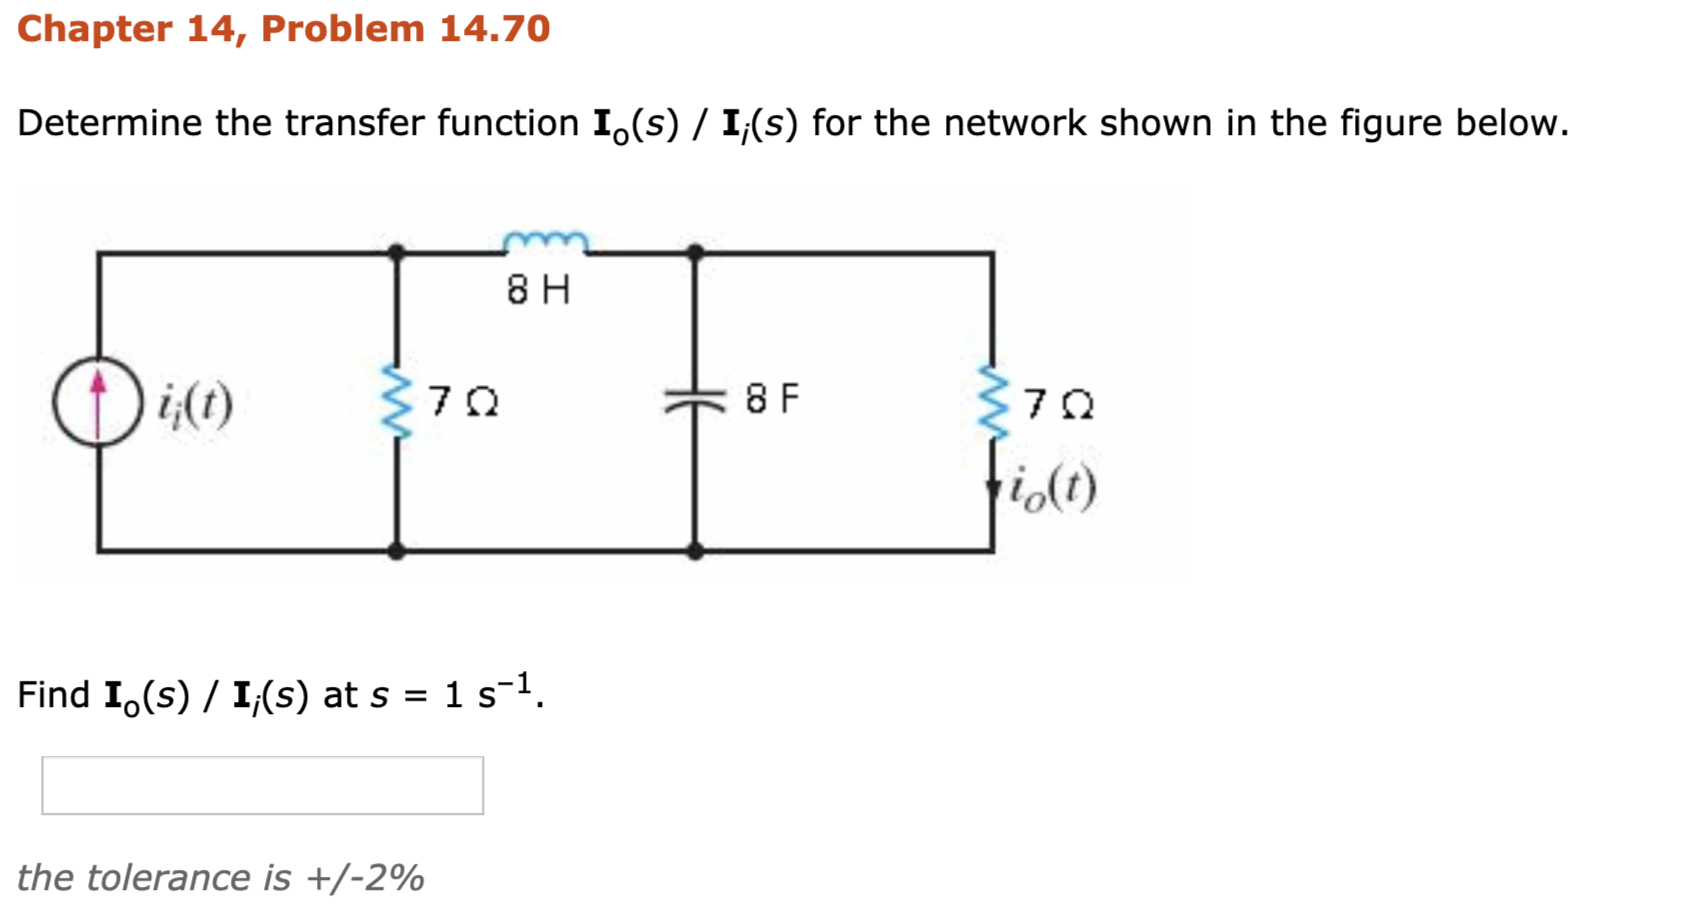 Chapter 14, Problem 14.70
Determine the transfer function I.(s) / I,(s) for the network shown in the figure below.
О н0
370
ti(t)
Find I,(s) / I(s) at s = 1 s-1.
the tolerance is +/-2%
CO
